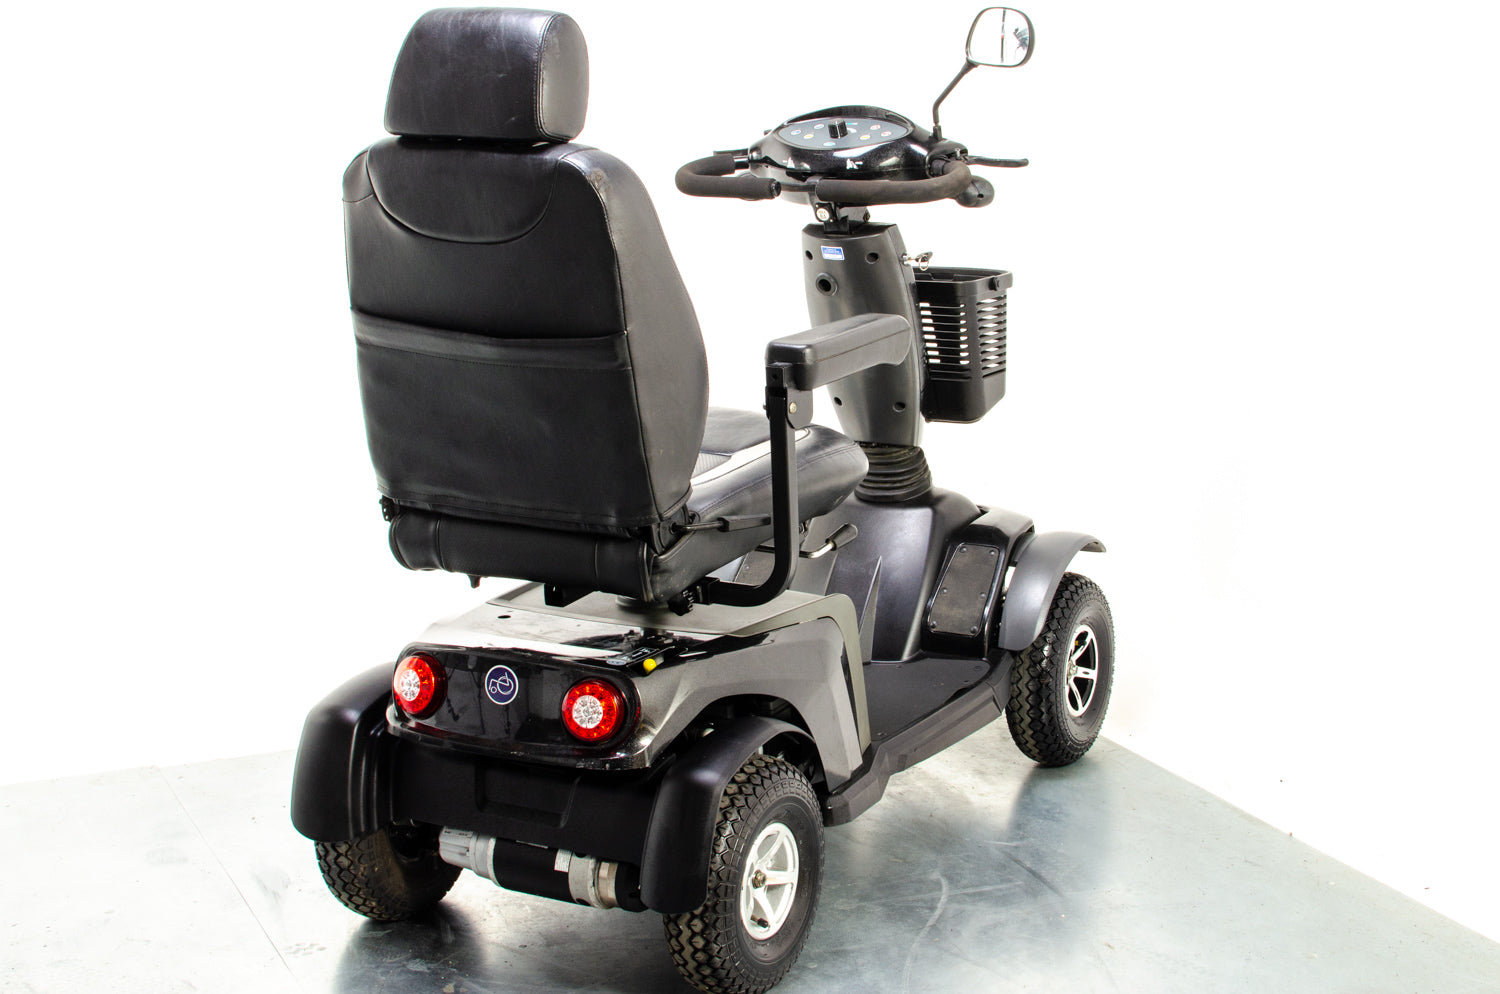 Excel Galaxy II All-Terrain Off-Road Used Mobility Scooter 8mph Van Os Large Comfy Class 3 Road Legal 13255